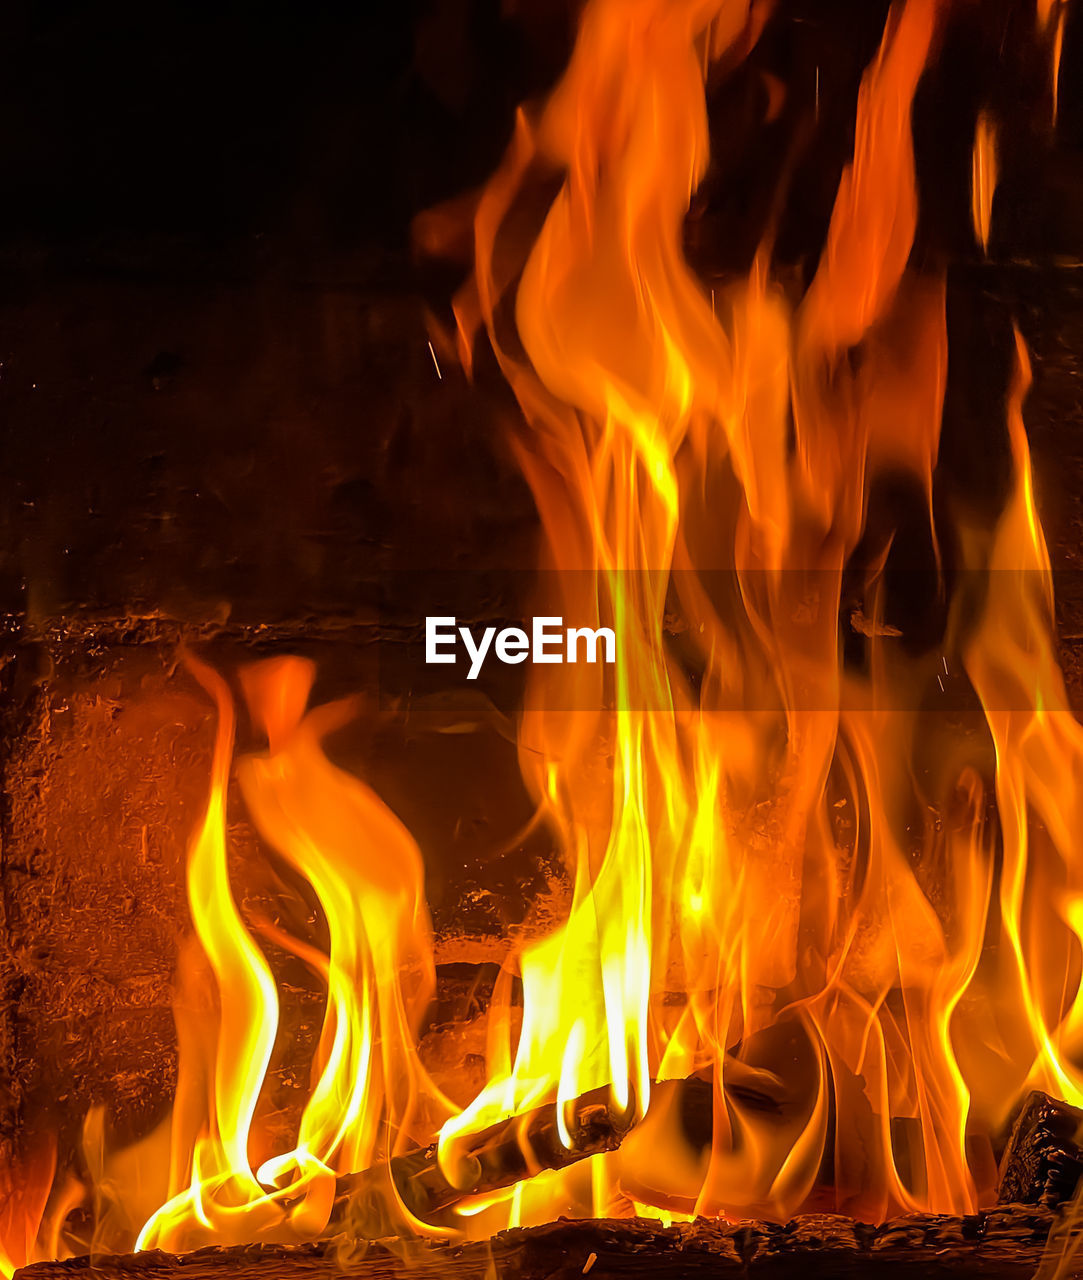 burning, fire, flame, heat, nature, orange color, campfire, fireplace, no people, yellow, communication, bonfire, sign, motion, glowing, night, warning sign, wood, font, close-up, red